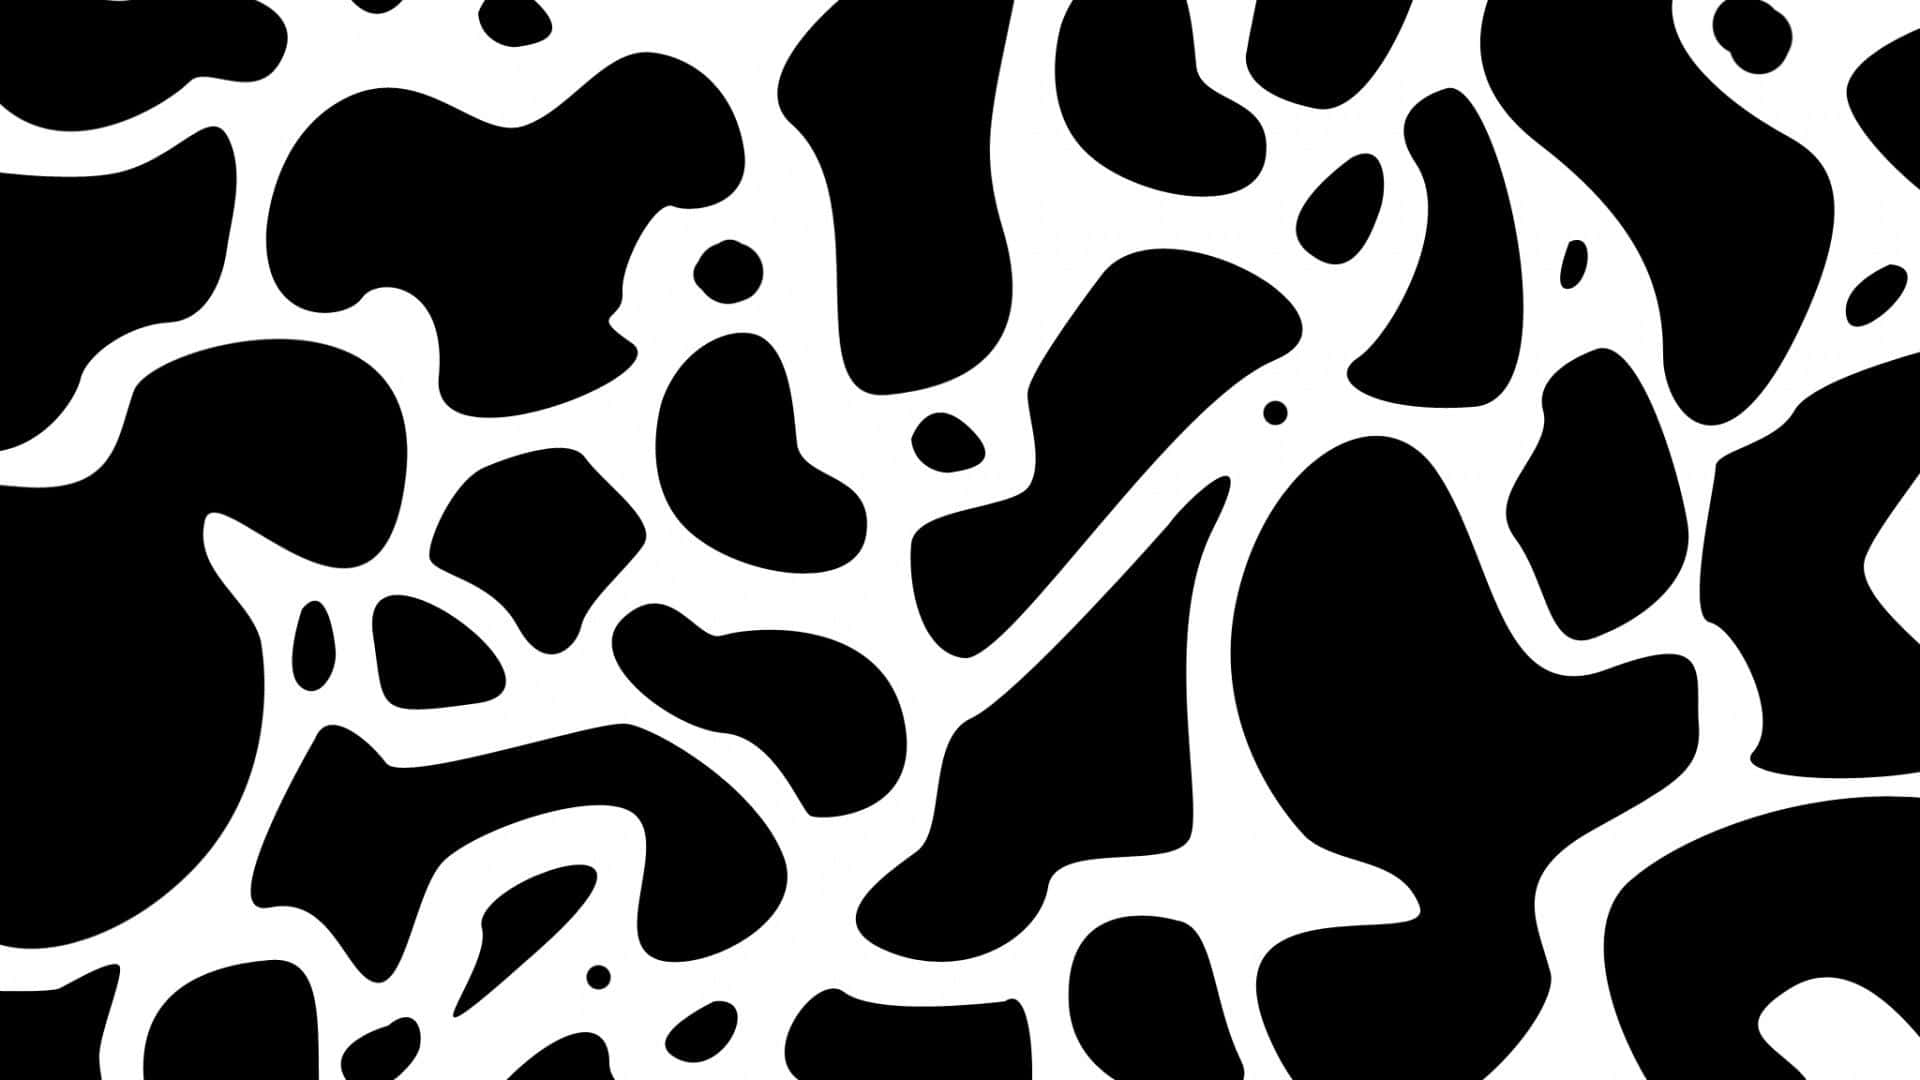 A close-up of a black and white cow-print pattern